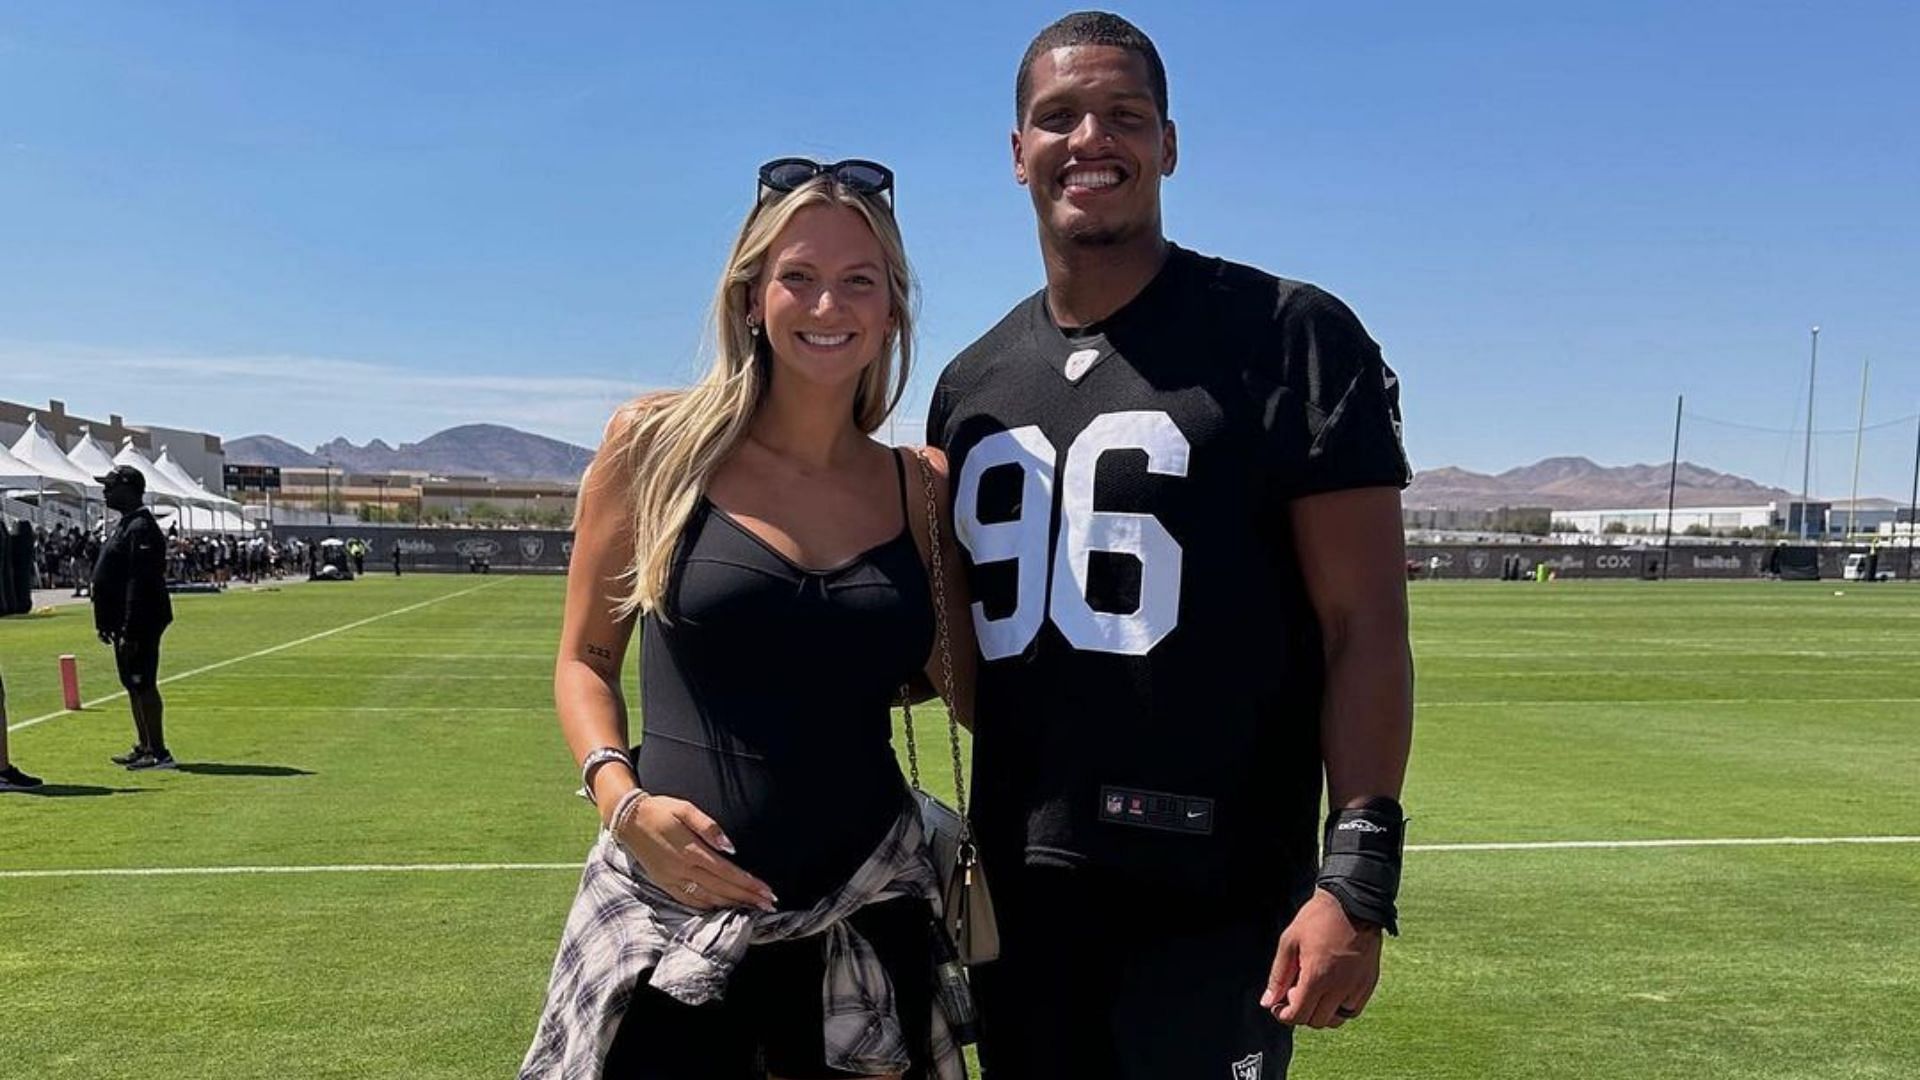 Allison Kuch visiting Isaac Rochell at the Las Vegas Raiders training camp. (Image credit: Allison Rochell on Instagram)